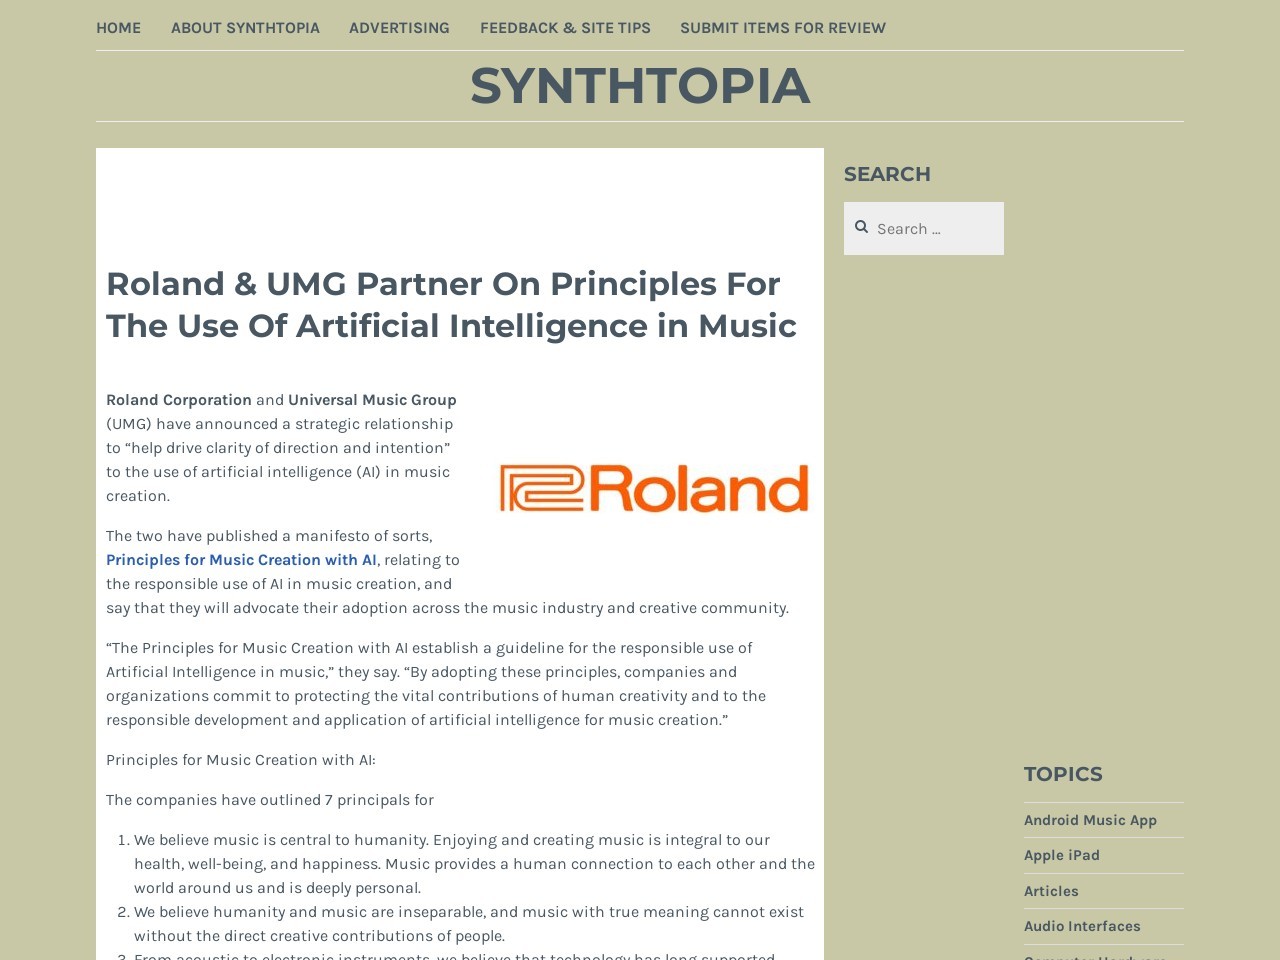 Roland & UMG Partner On Principles For The Use Of Artificial Intelligence in Music – Synthtopia